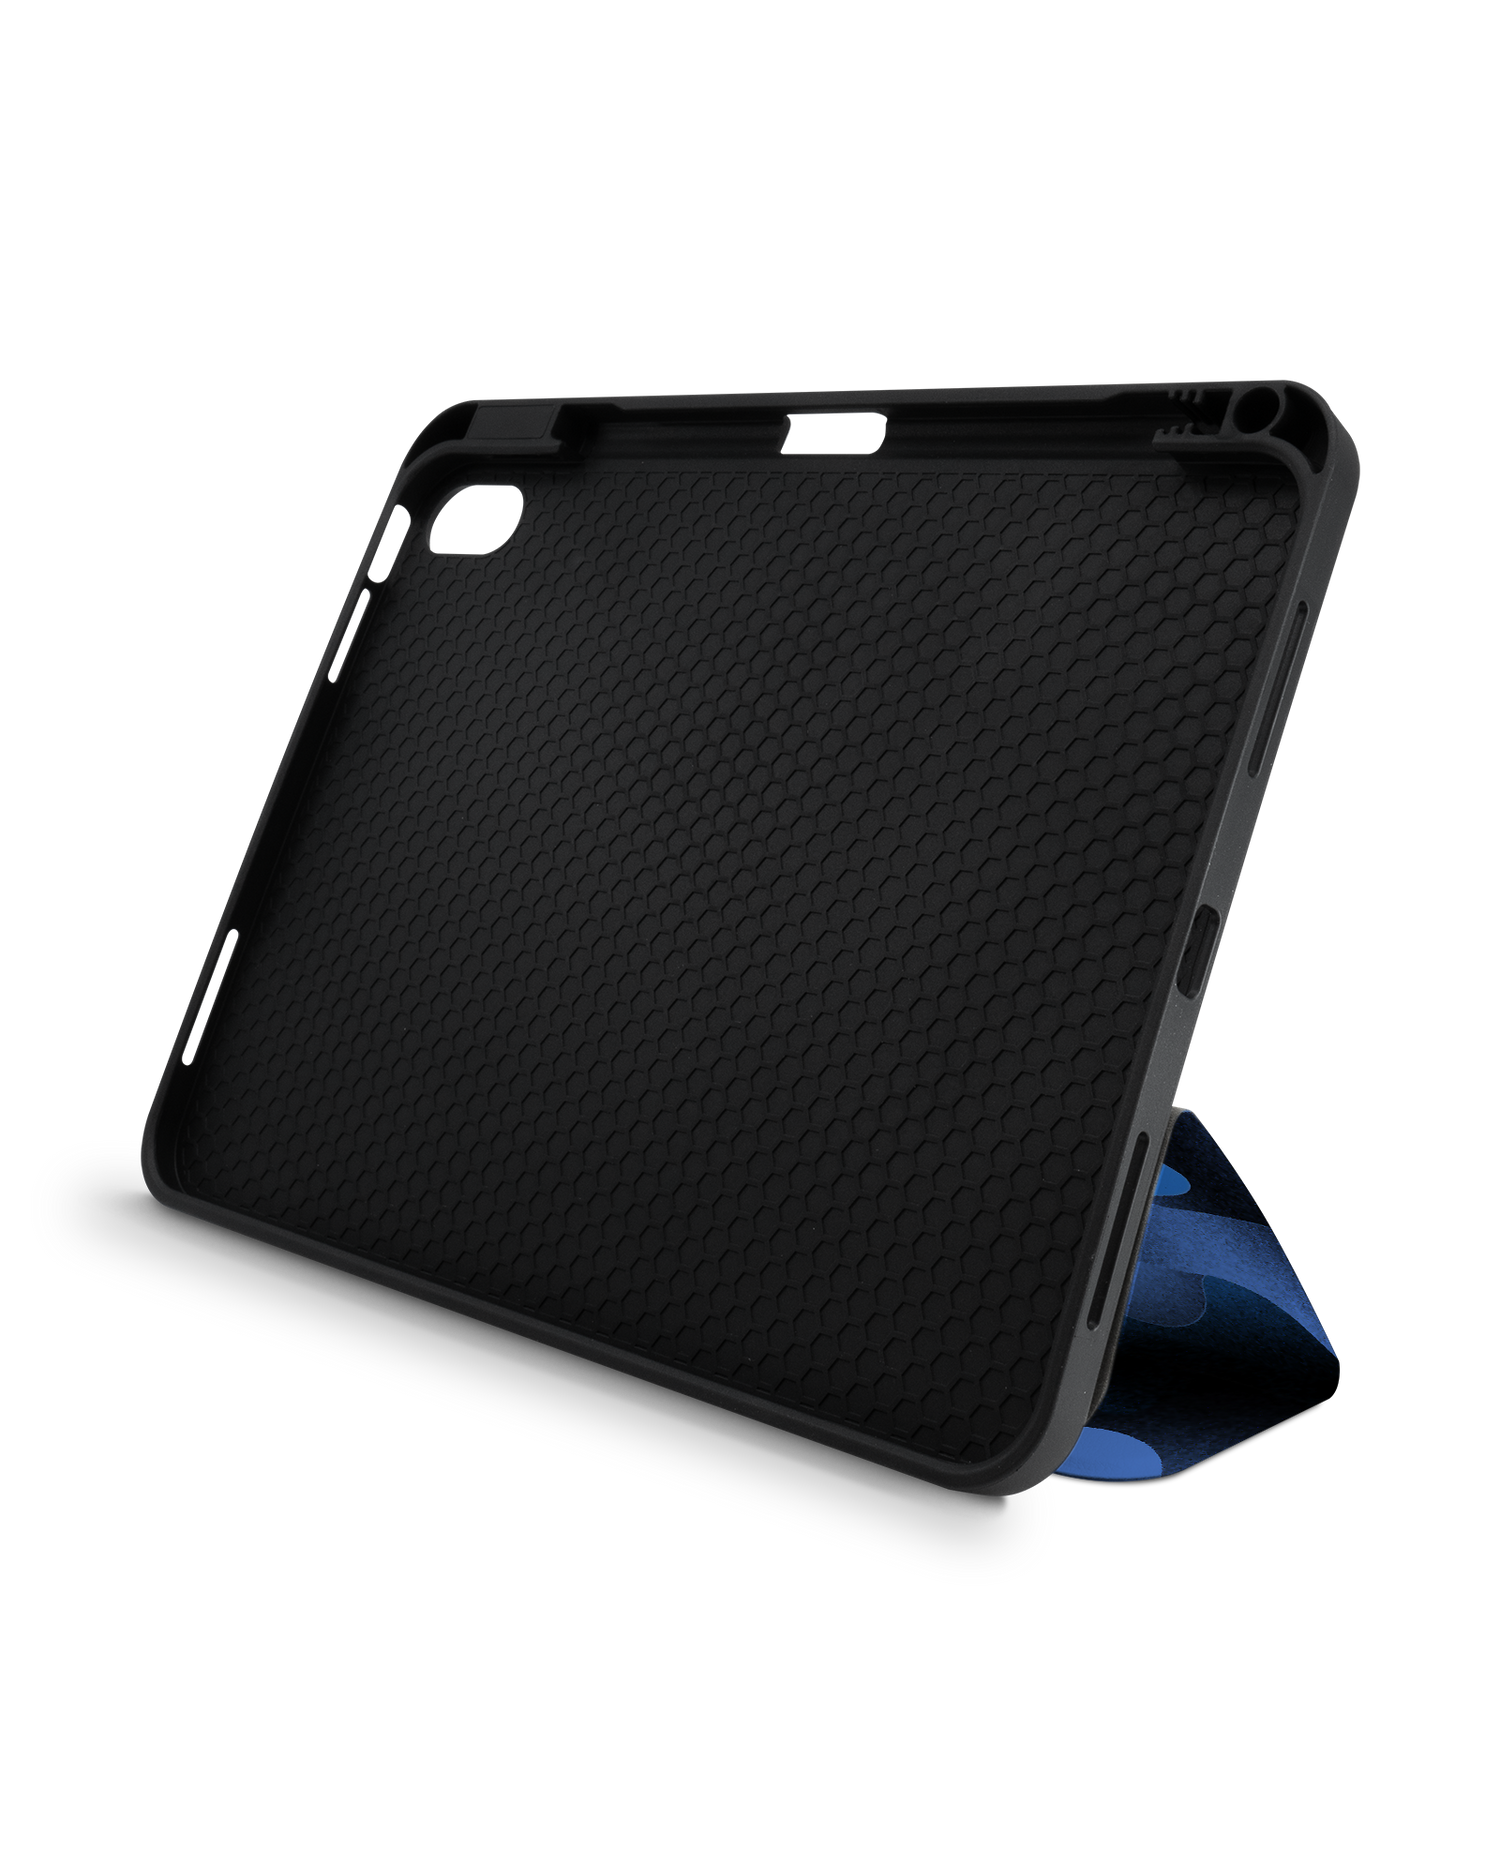 Night Moves iPad Case with Pencil Holder for Apple iPad (10th Generation): Set up in landscape format (front view)